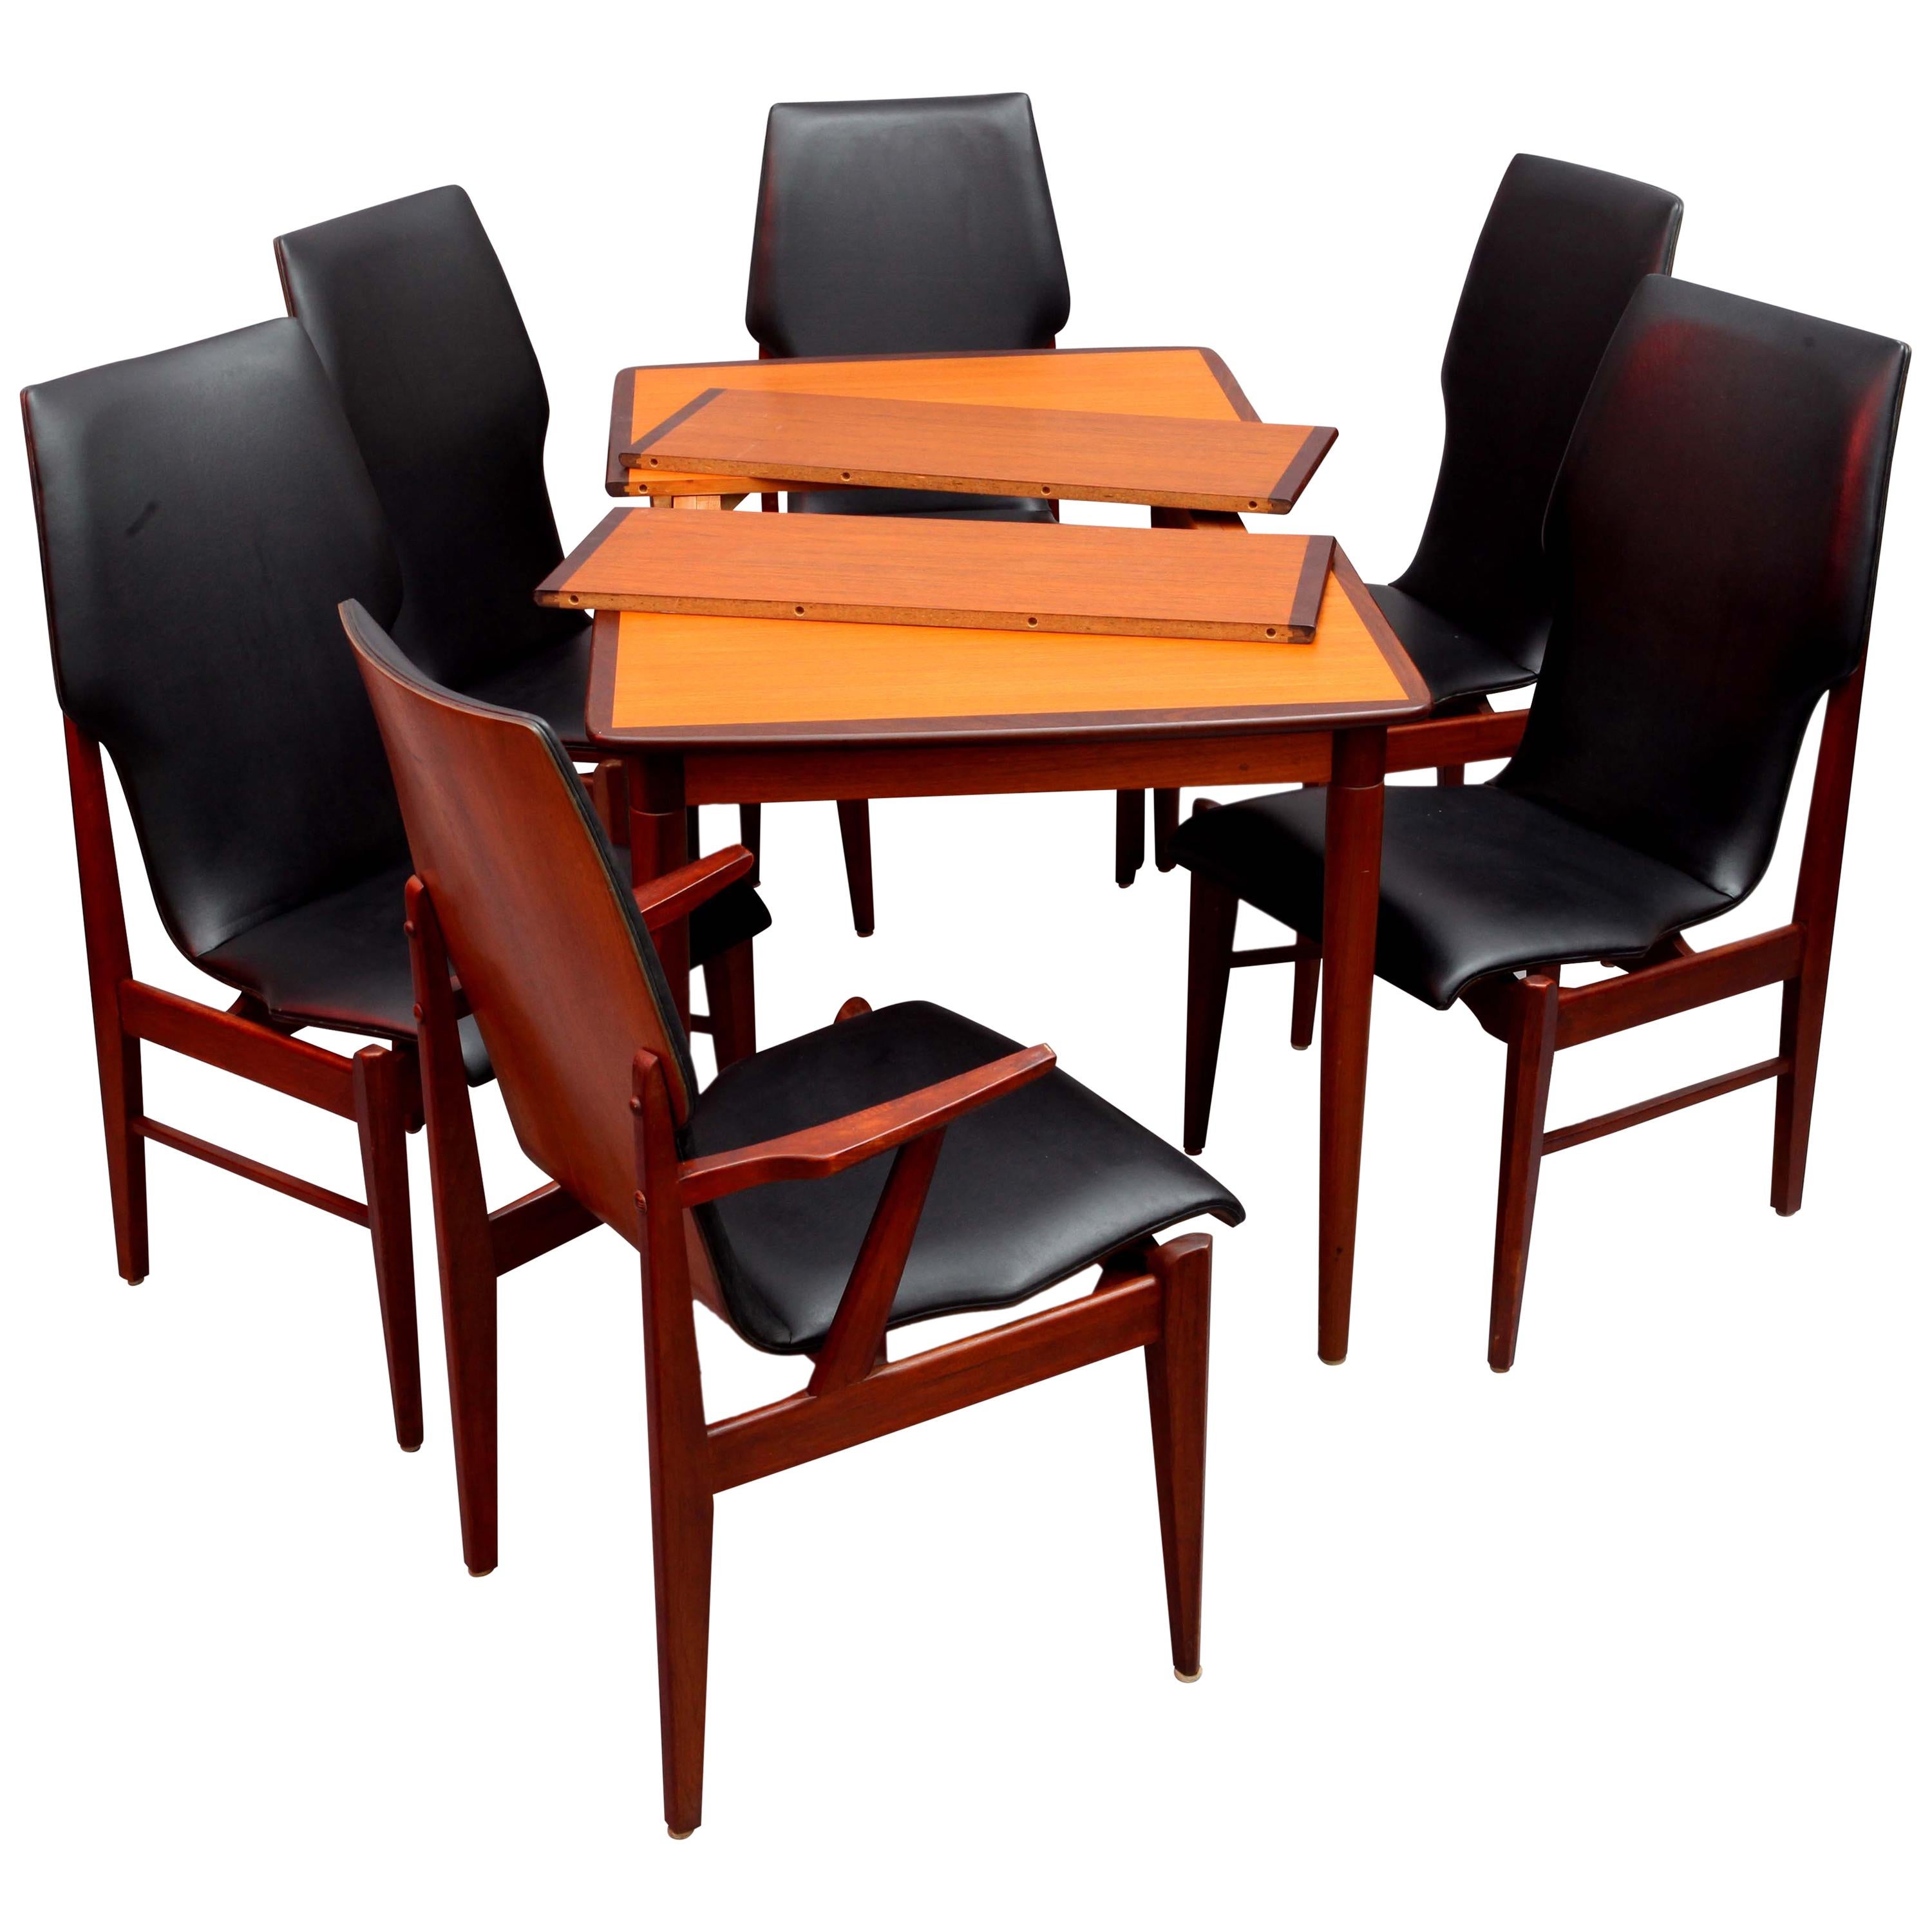 Scandinavian Extendable Dining Table with Six Chairs, Denmark, 1950, Teak Wood